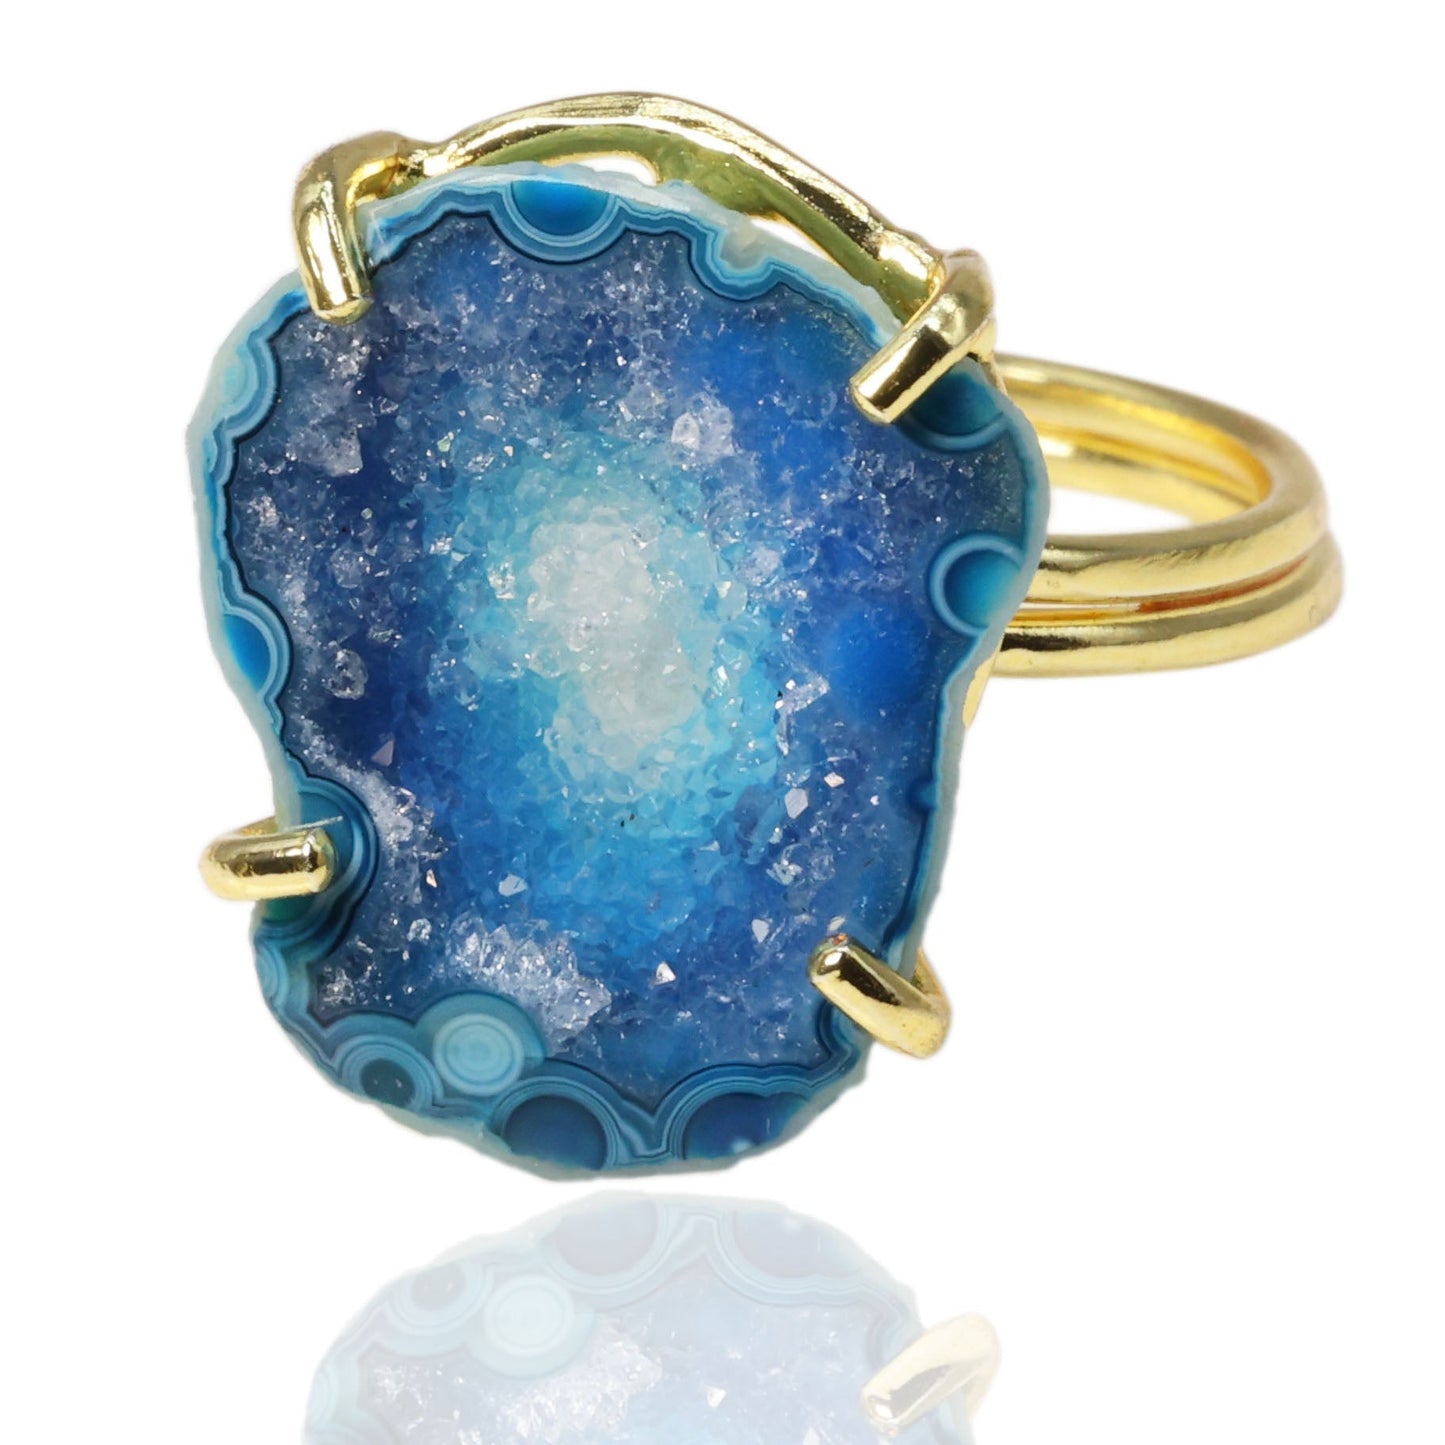 Anokha Small Geode Statement Rings, 15 - 25 MM, Unlimited Sparkle in Life !! - Meena Design